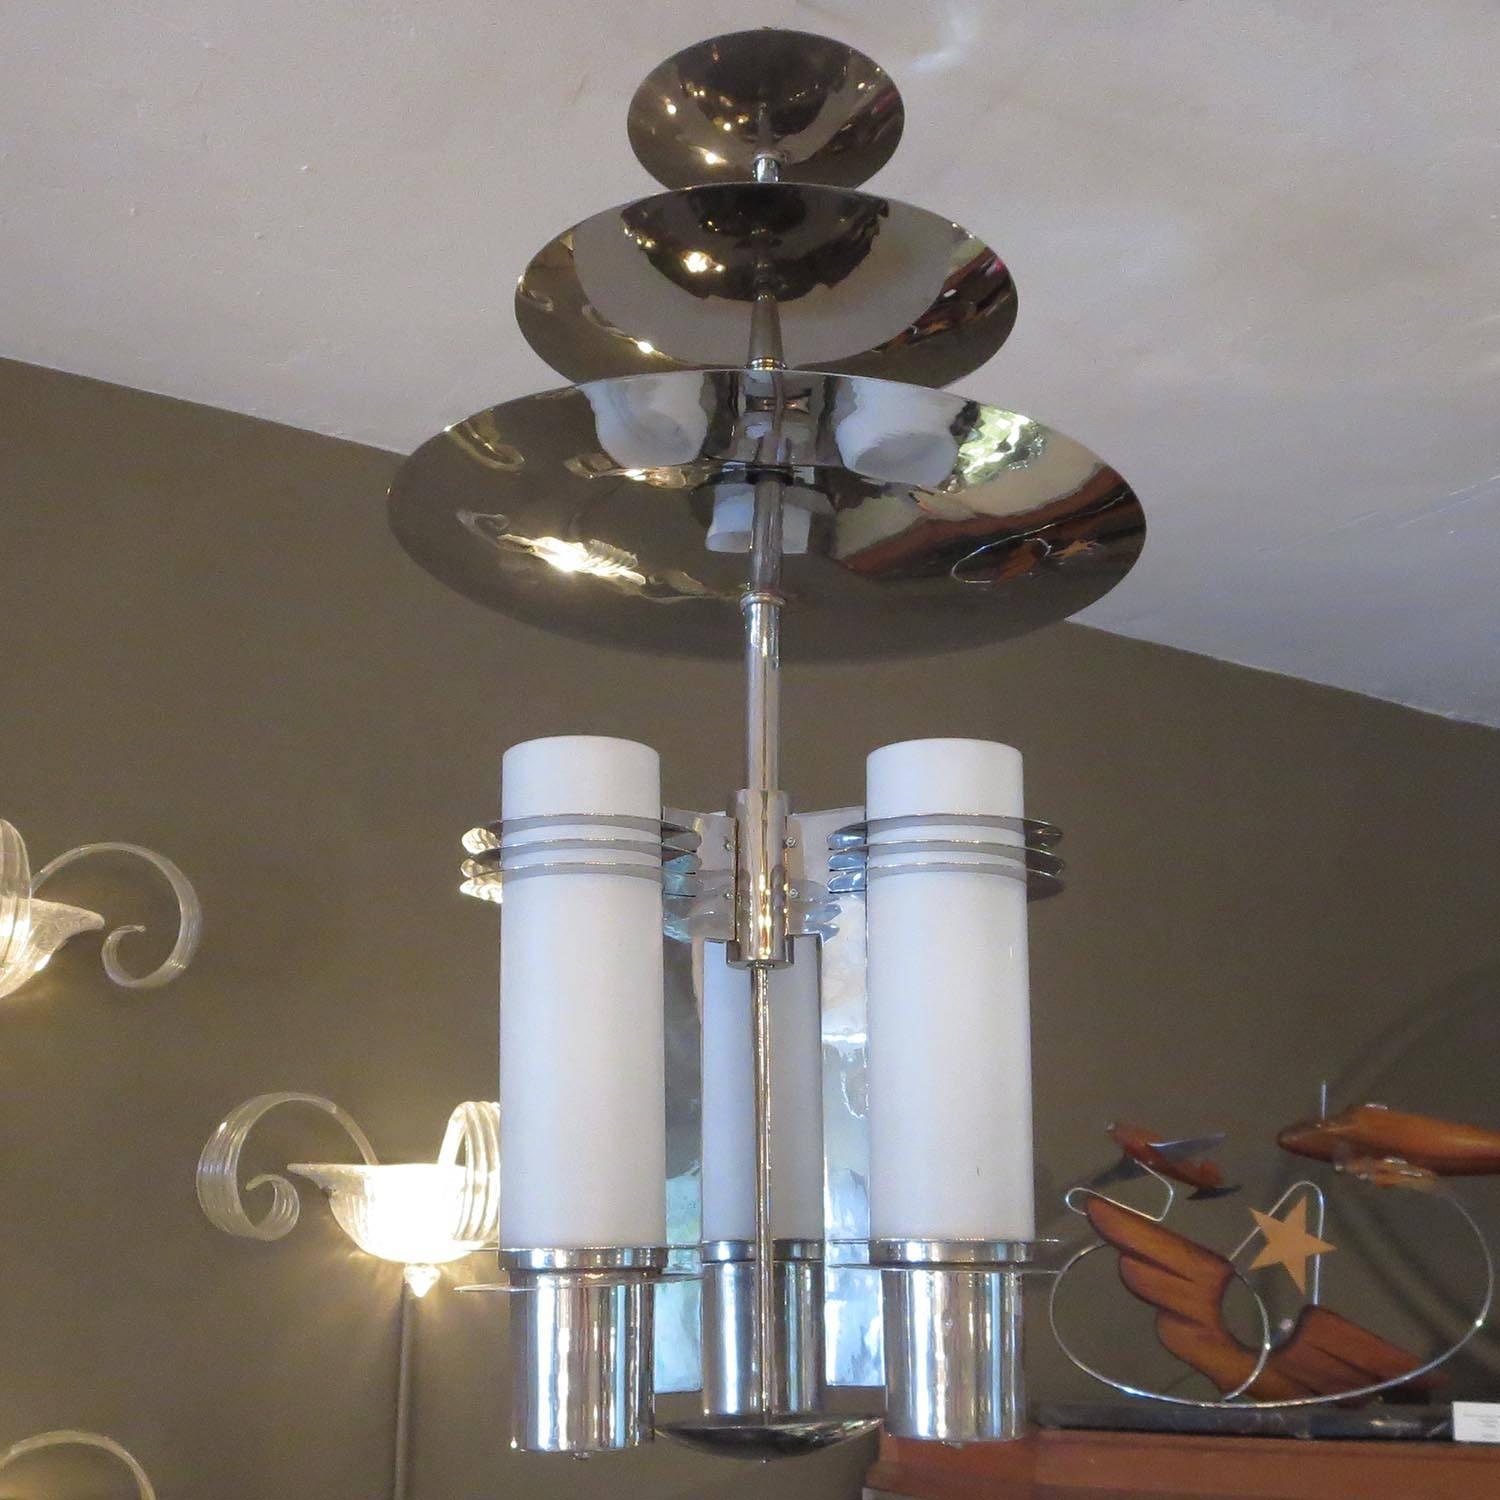 An incredibly stylized lamp that would have been found in a 1930s theatre or skyscraper lobby. The lamp has been re-plated and rewired, and looks terrific. The top disc slides down for ceiling mounting, then raises up to cover the ceiling mount.